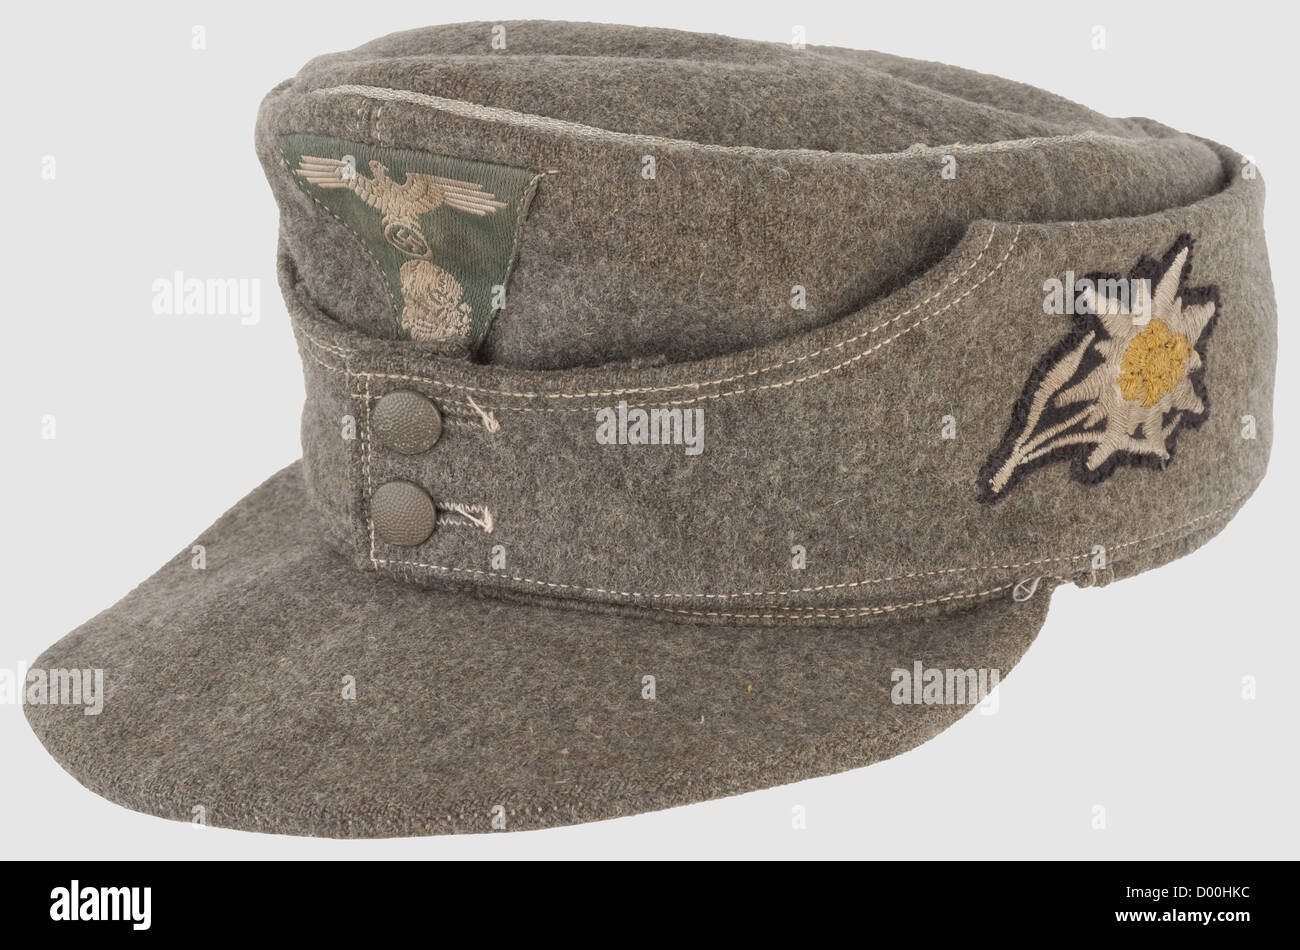 A peaked cap for leaders of mountain troops,of field grey woolen material with silver piping and field grey metal buttons,light linen liner(faded). BeVo national badge in trapezoid shape,silver-grey weave on a field grey background. Machine-embroidered Edelweiss,historic,historical,1930s,1930s,20th century,Waffen-SS,armed division of the SS,armed service,armed services,NS,National Socialism,Nazism,Third Reich,German Reich,Germany,military,militaria,utensil,piece of equipment,utensils,object,objects,stills,clipping,clippings,cut out,Additional-Rights-Clearences-Not Available Stock Photo